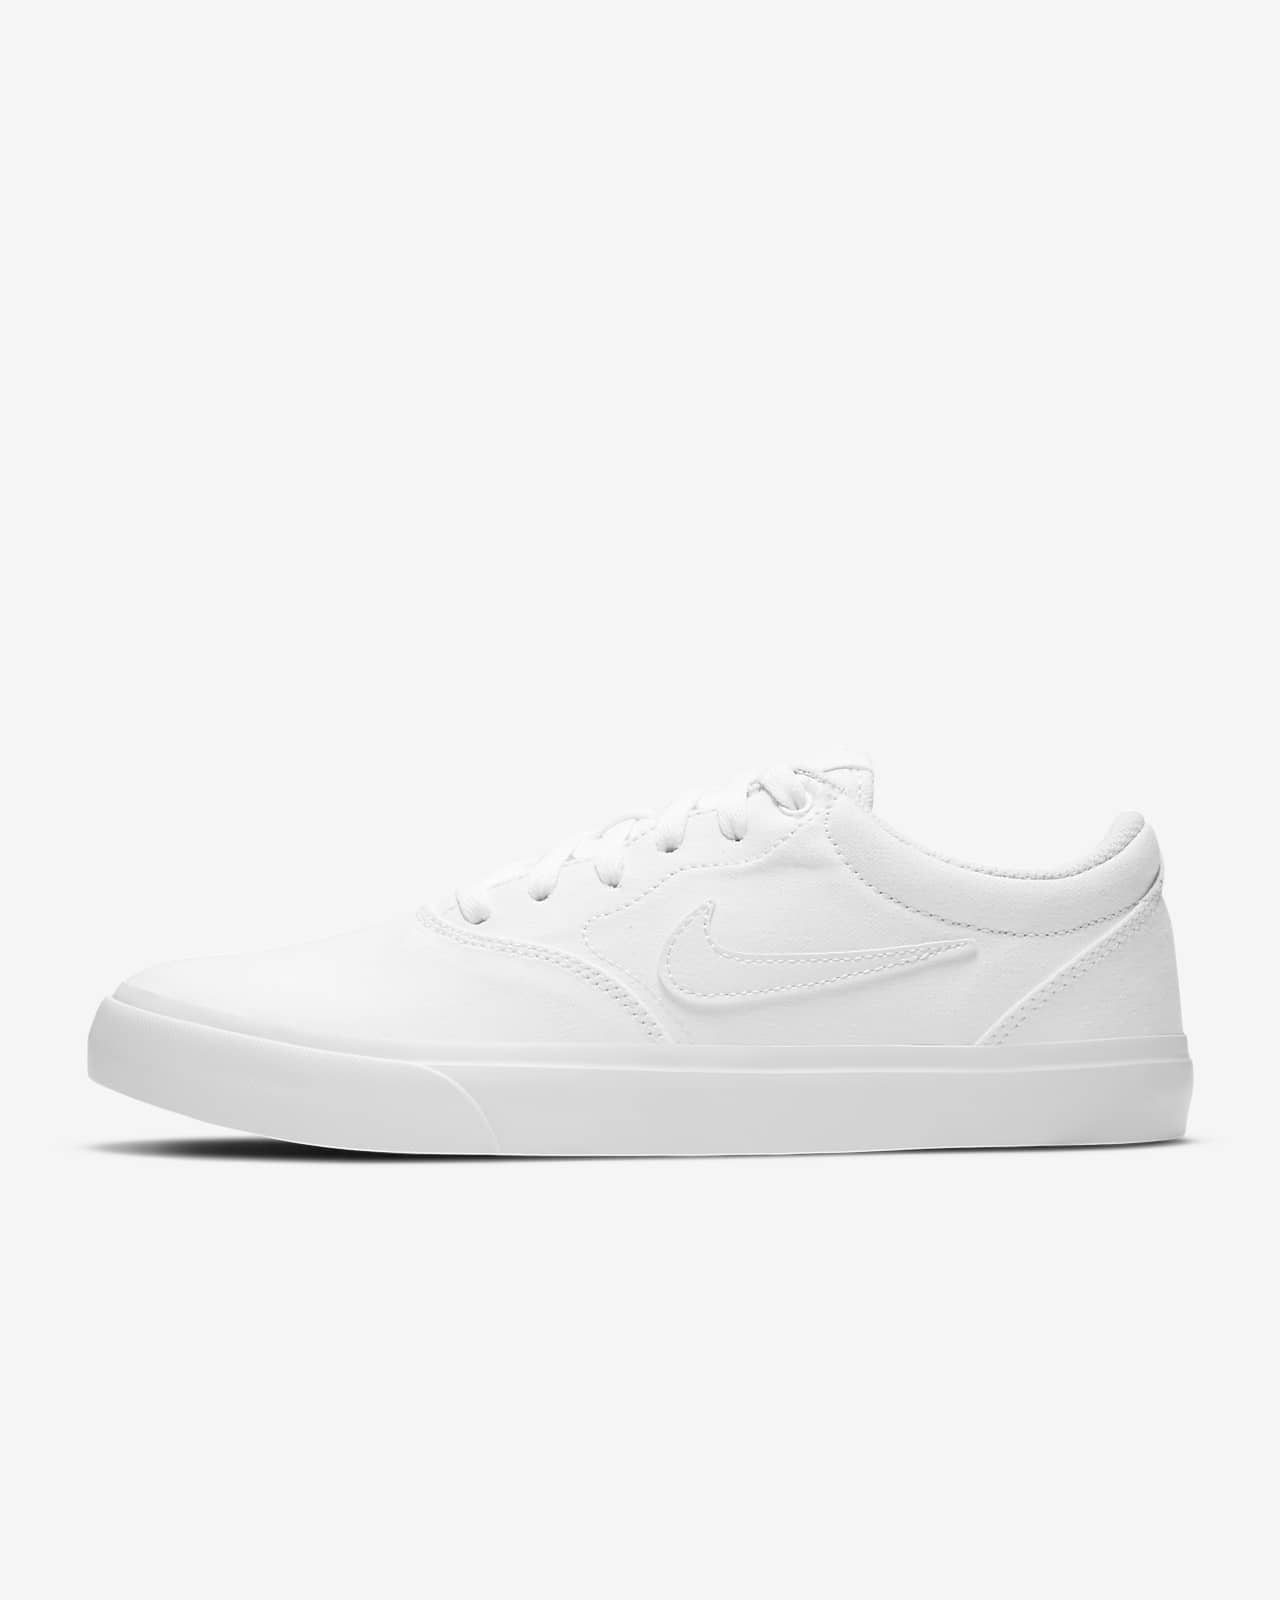 nike sb charge canvas sneakers in white